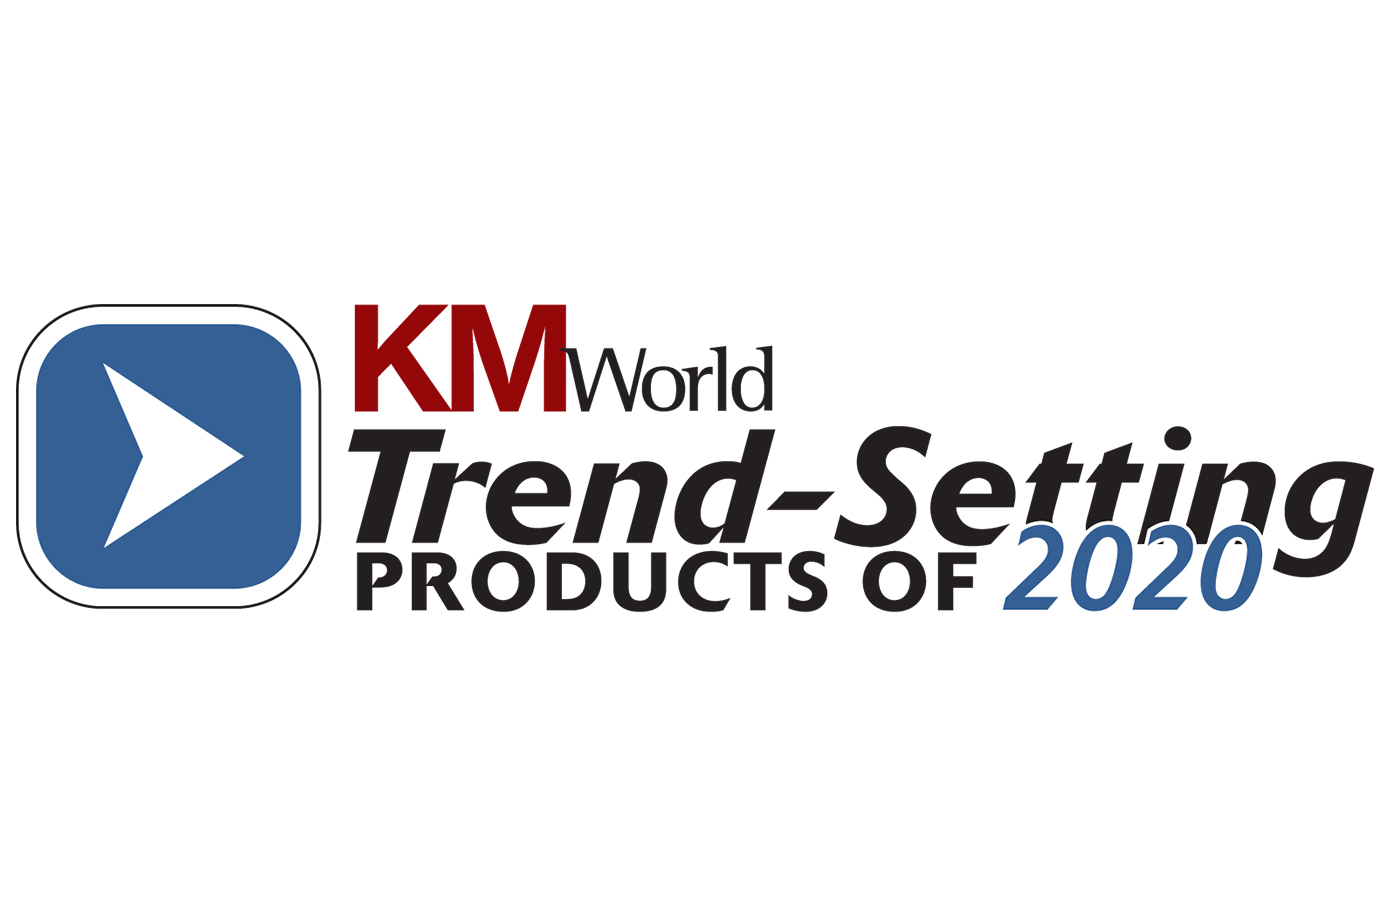 KMWorld Trend-Setting Products 2020